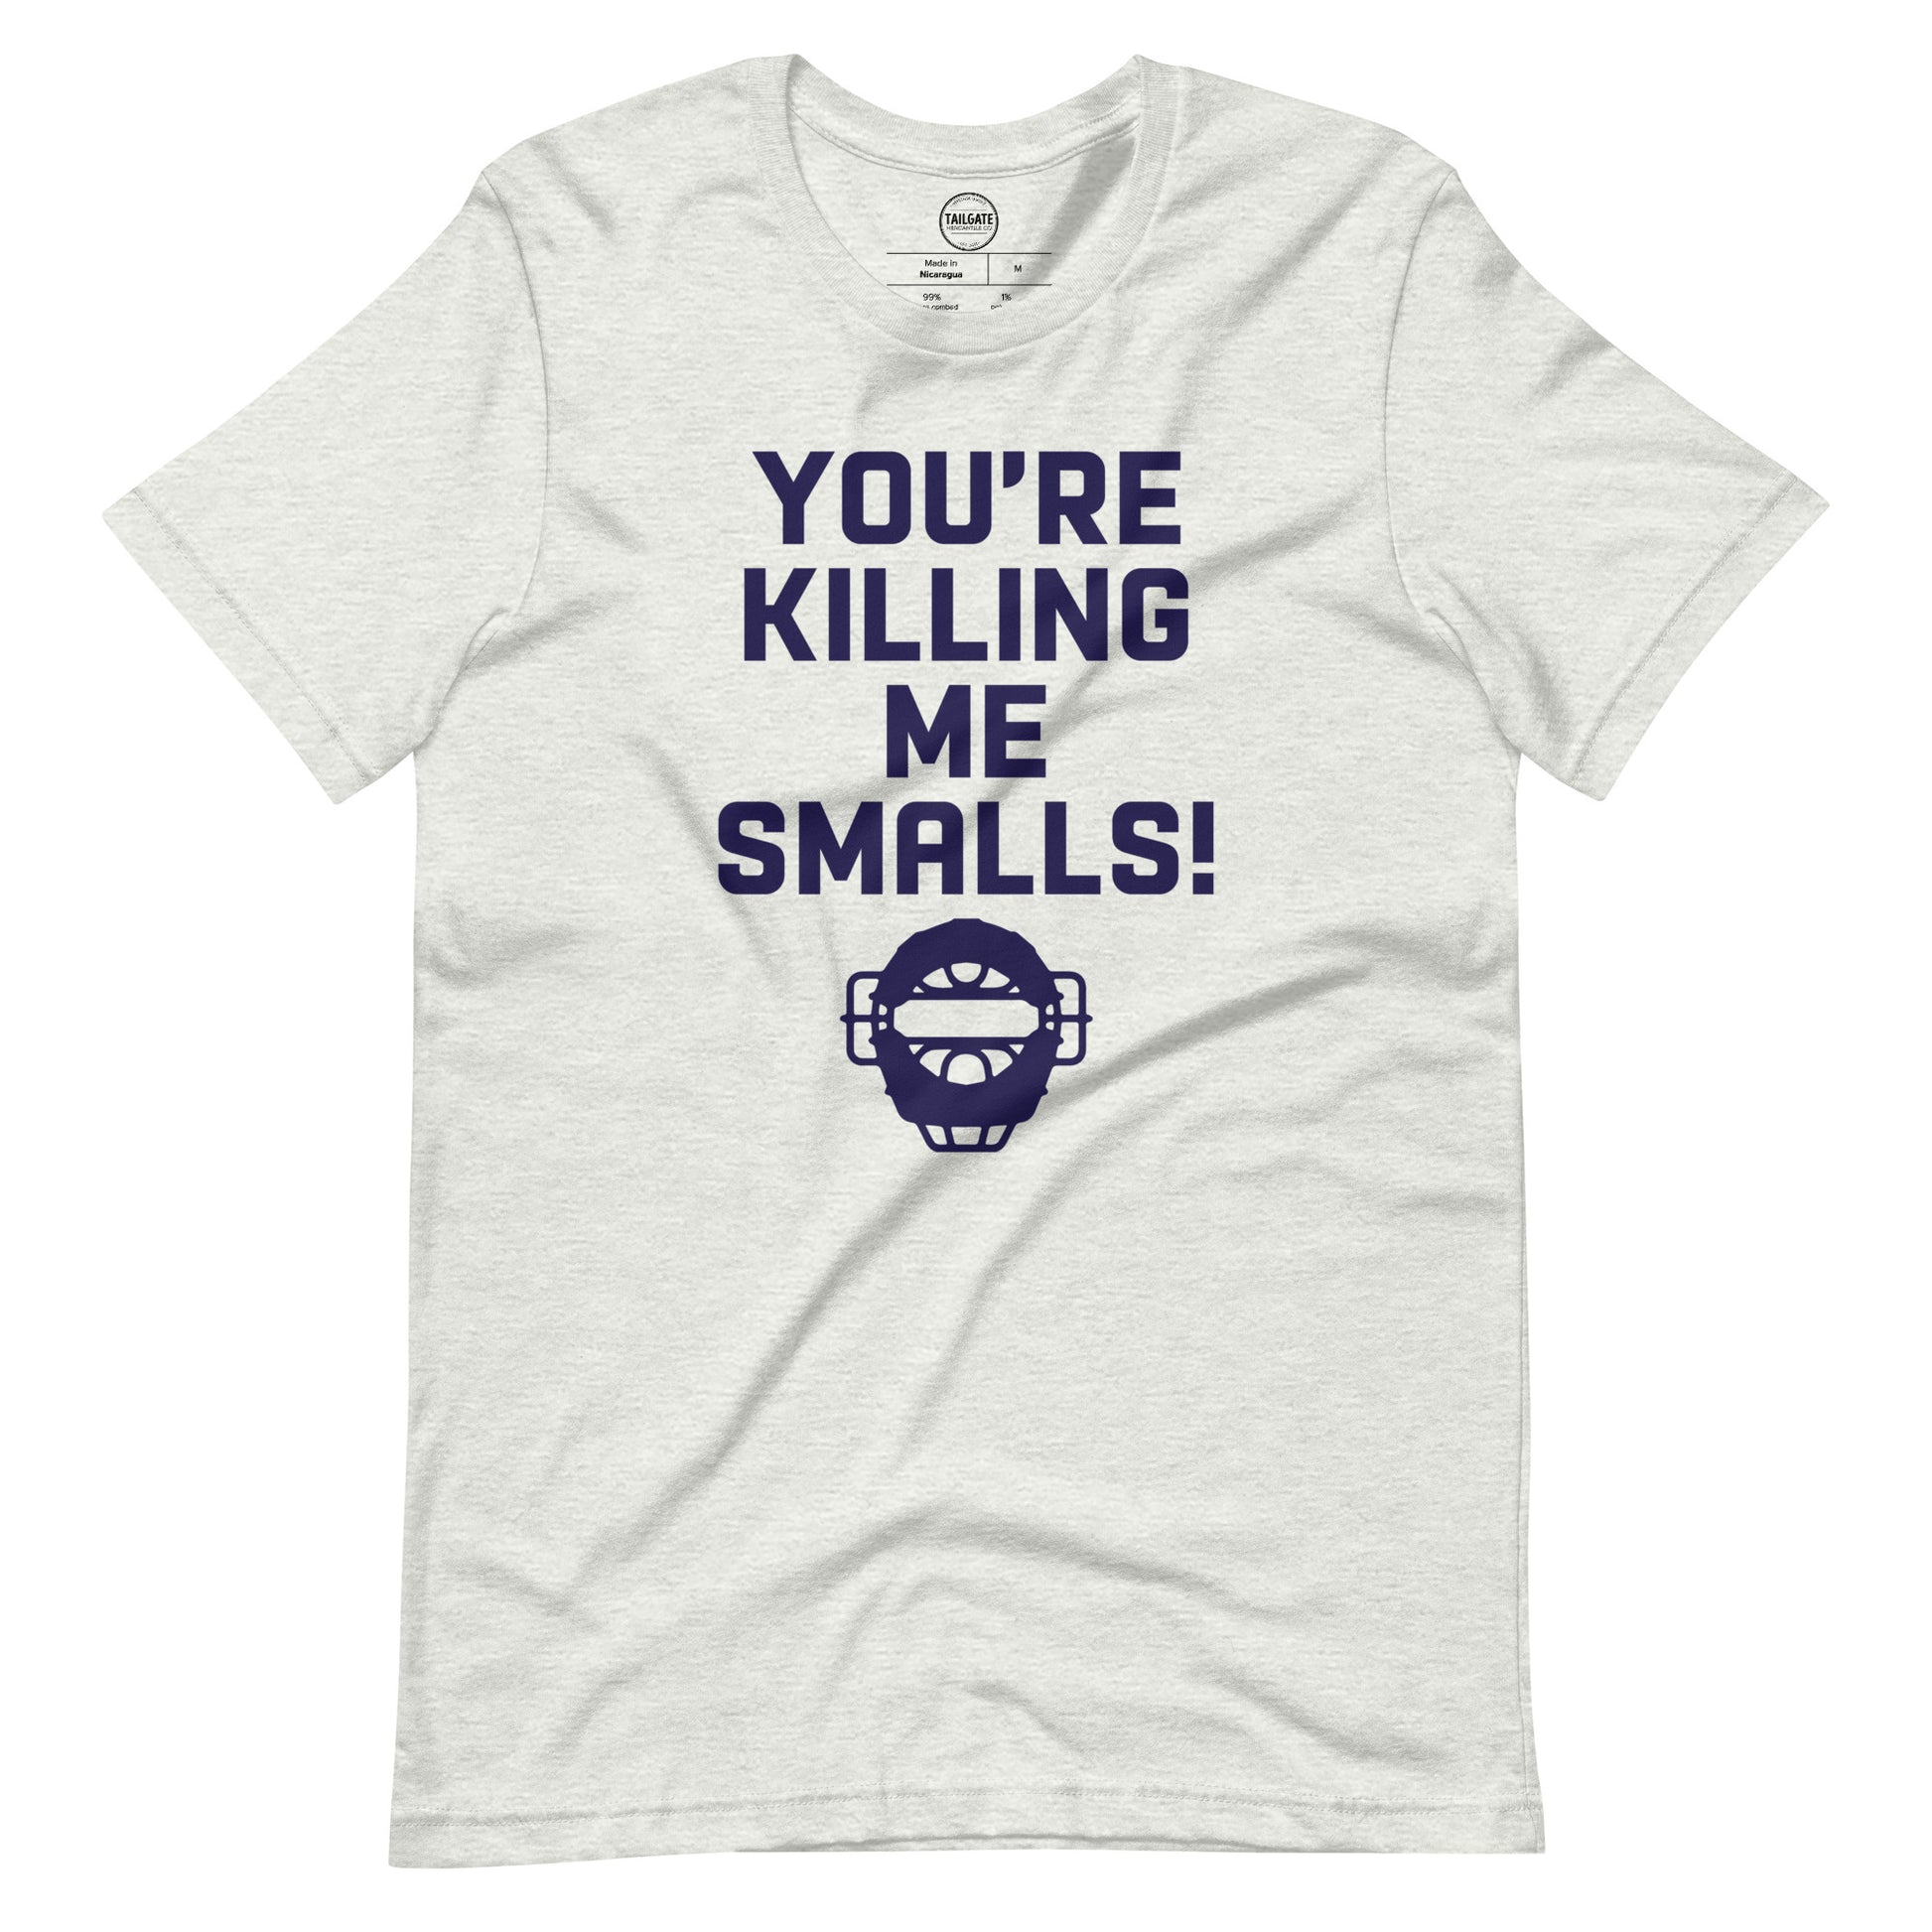 Image of heather ash coloured t-shirt with design of "You're Killing Me Smalls!" in navy located on centre chest. FOR.EV.ER. is an homage to the great baseball movie "The Sandlot". This design is exclusive to Tailgate Mercantile and available only online.